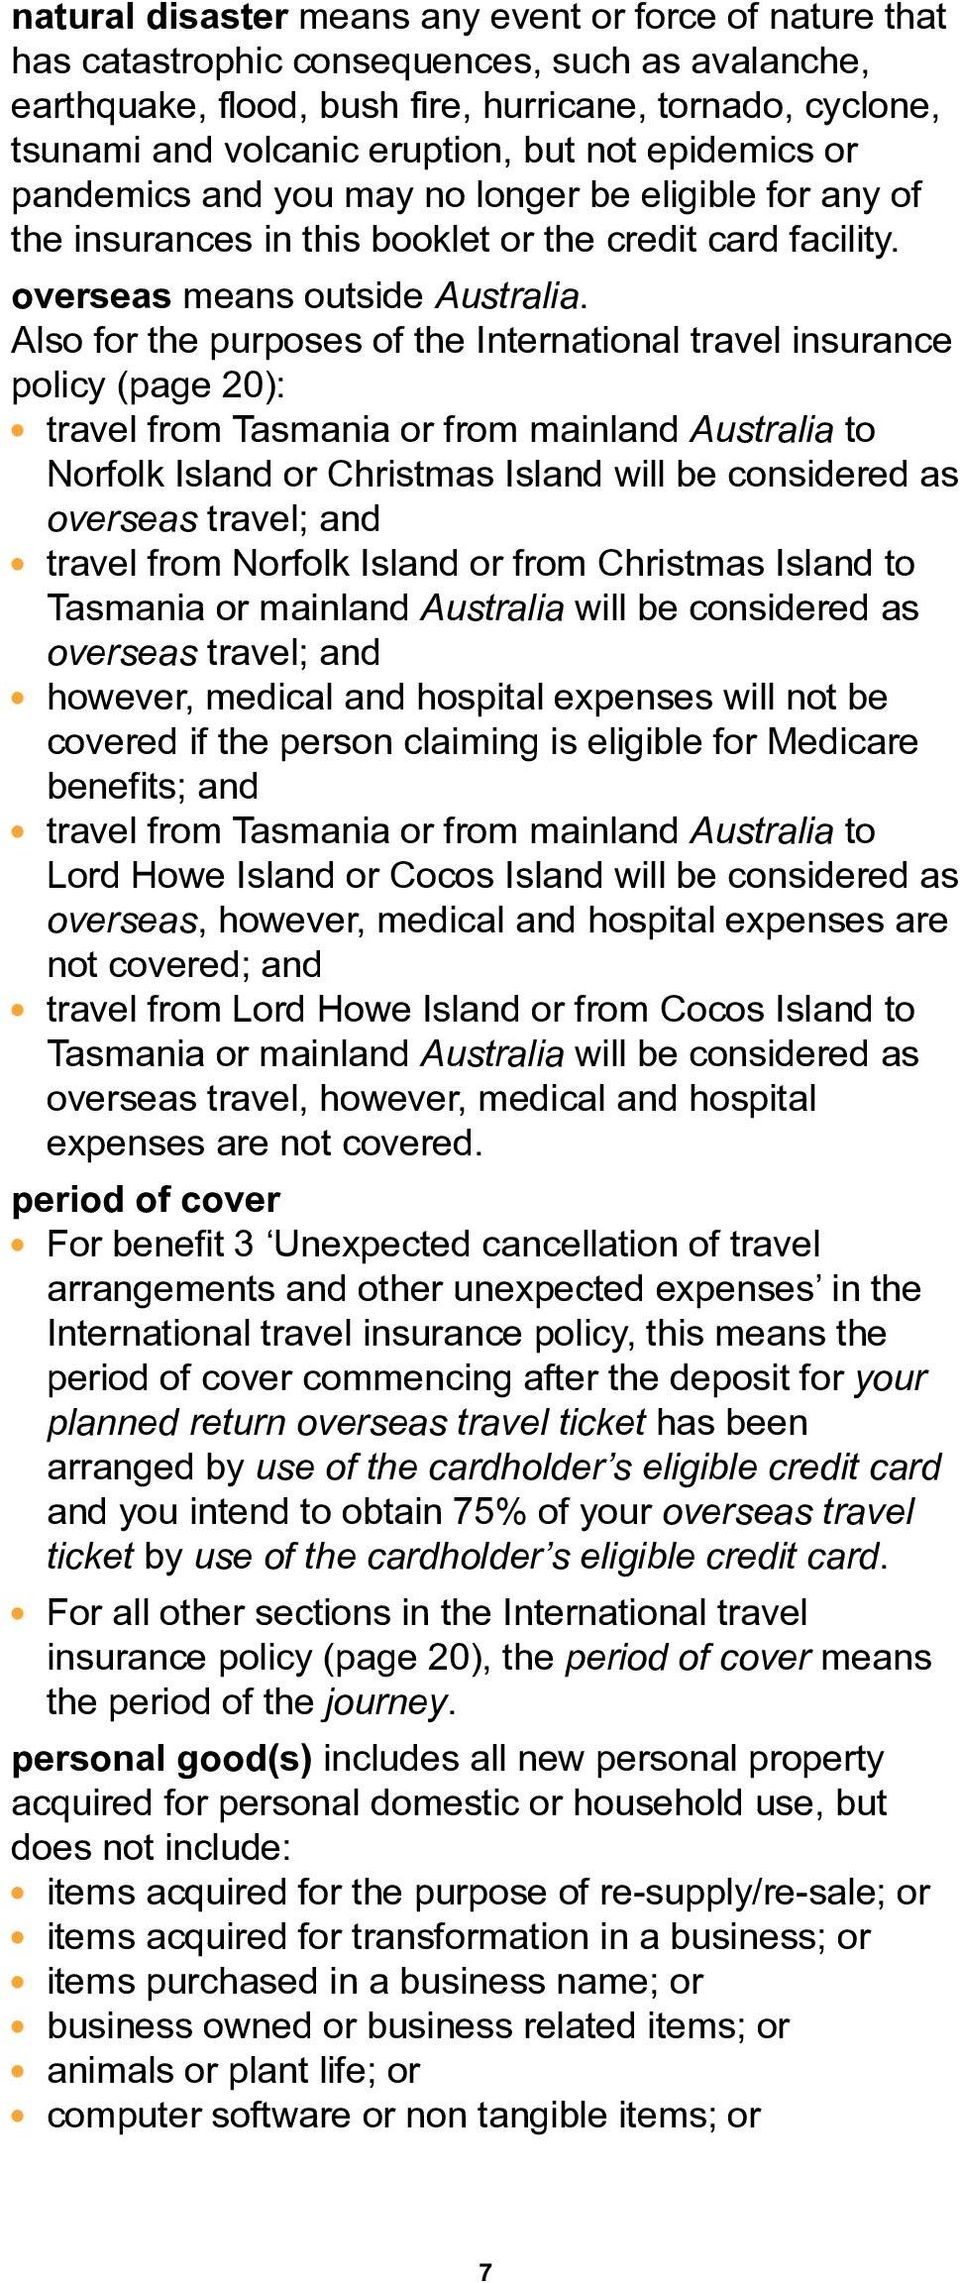 Also for the purposes of the International travel insurance policy (page 20): travel from Tasmania or from mainland Australia to Norfolk Island or Christmas Island will be considered as overseas